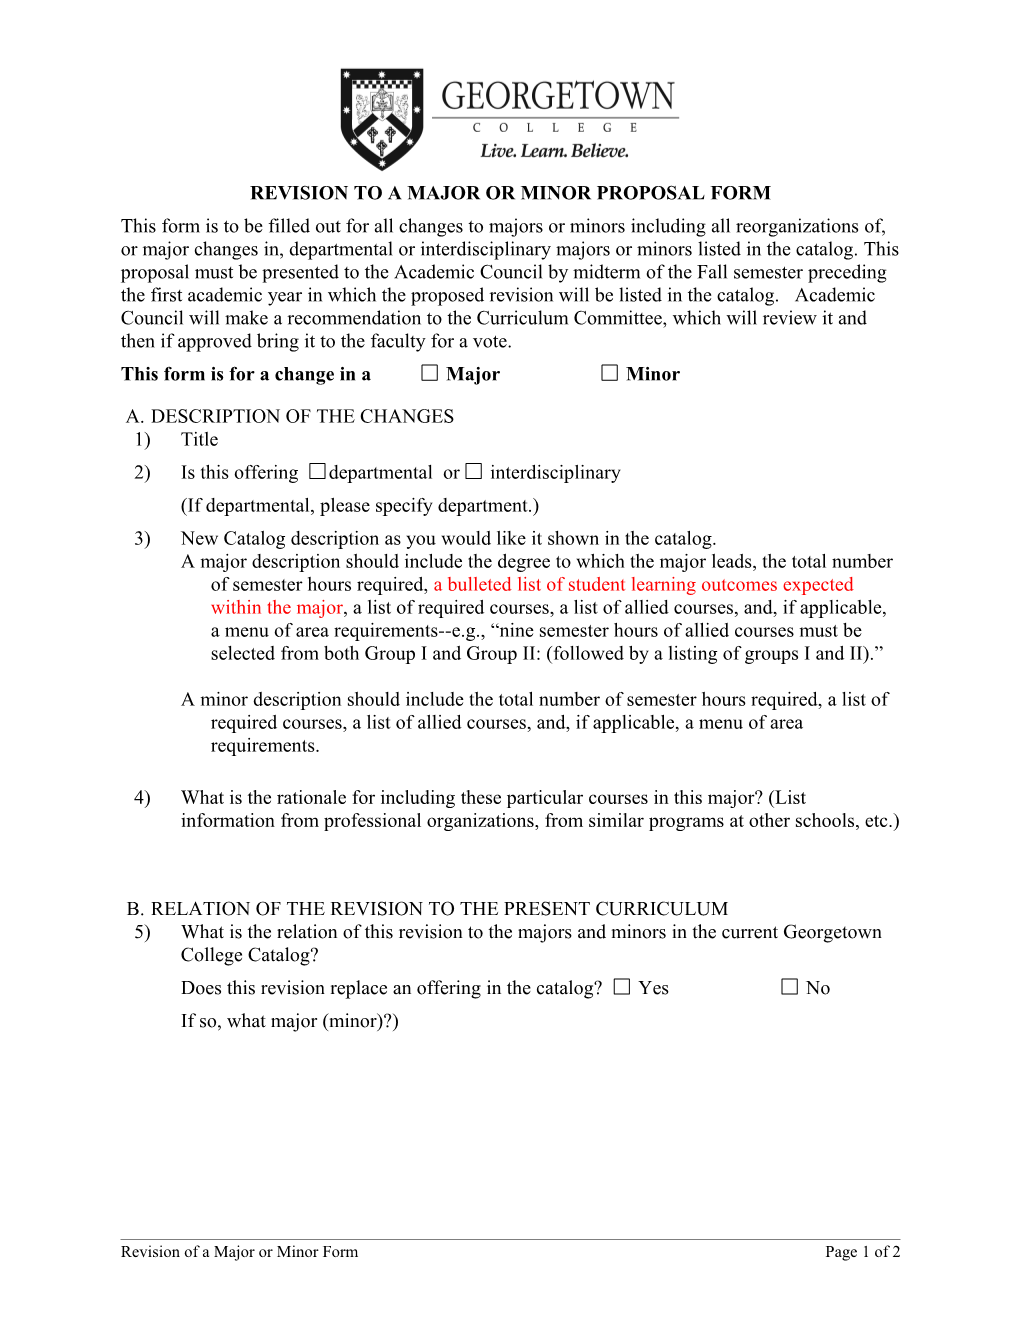 Revision to a Major Or Minor Proposal Form s1